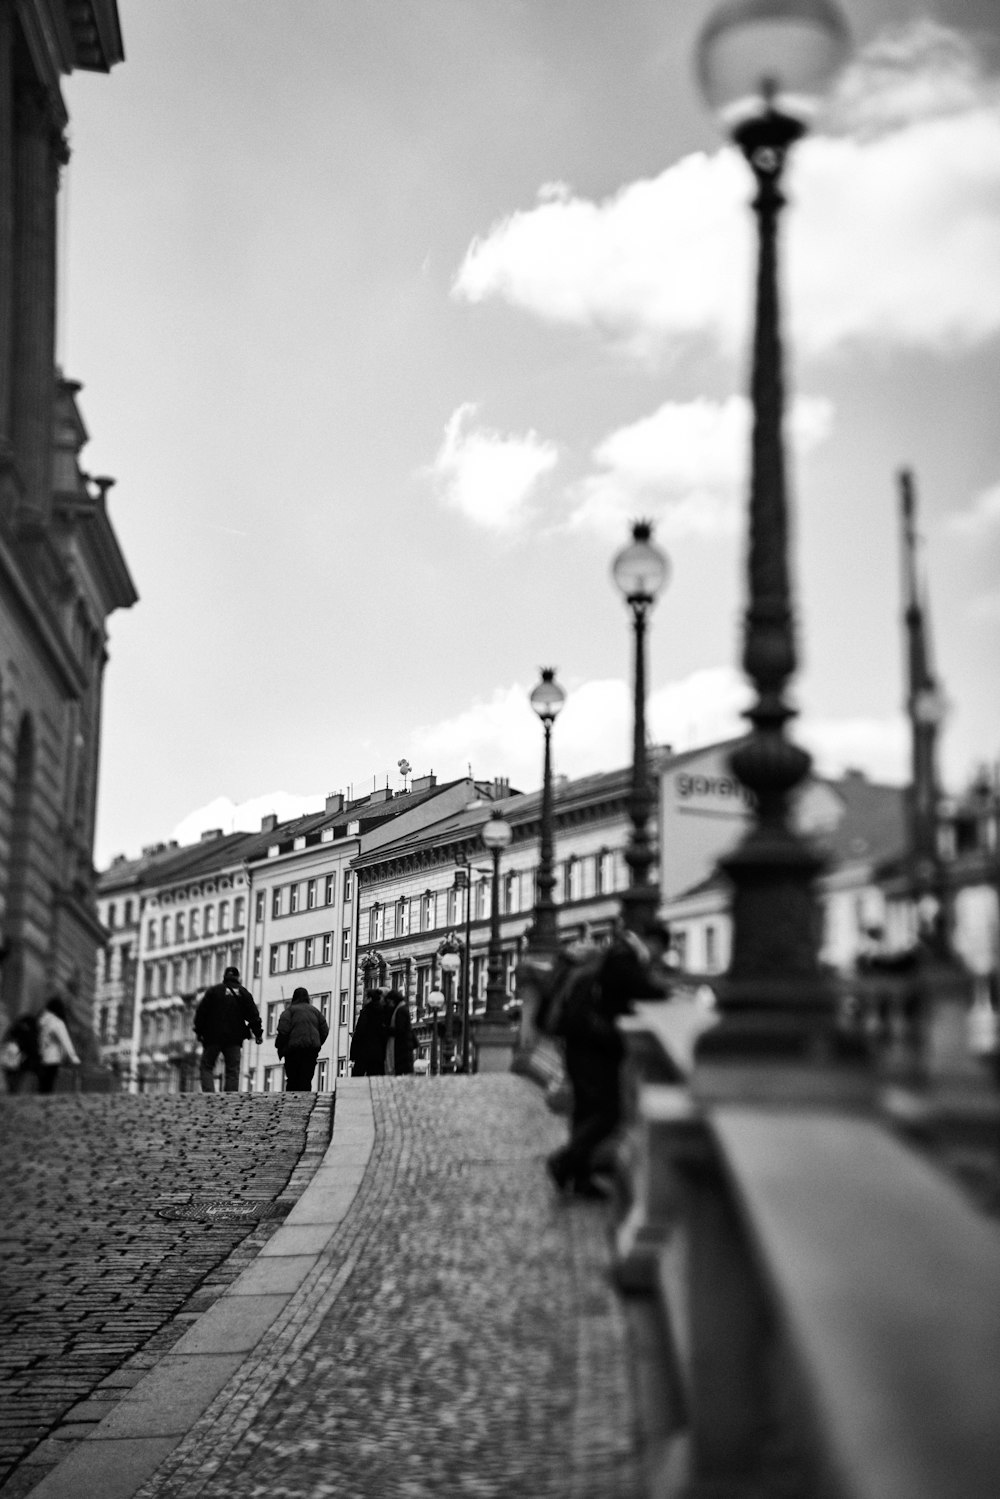 a black and white photo of people walking on a cobblestone street